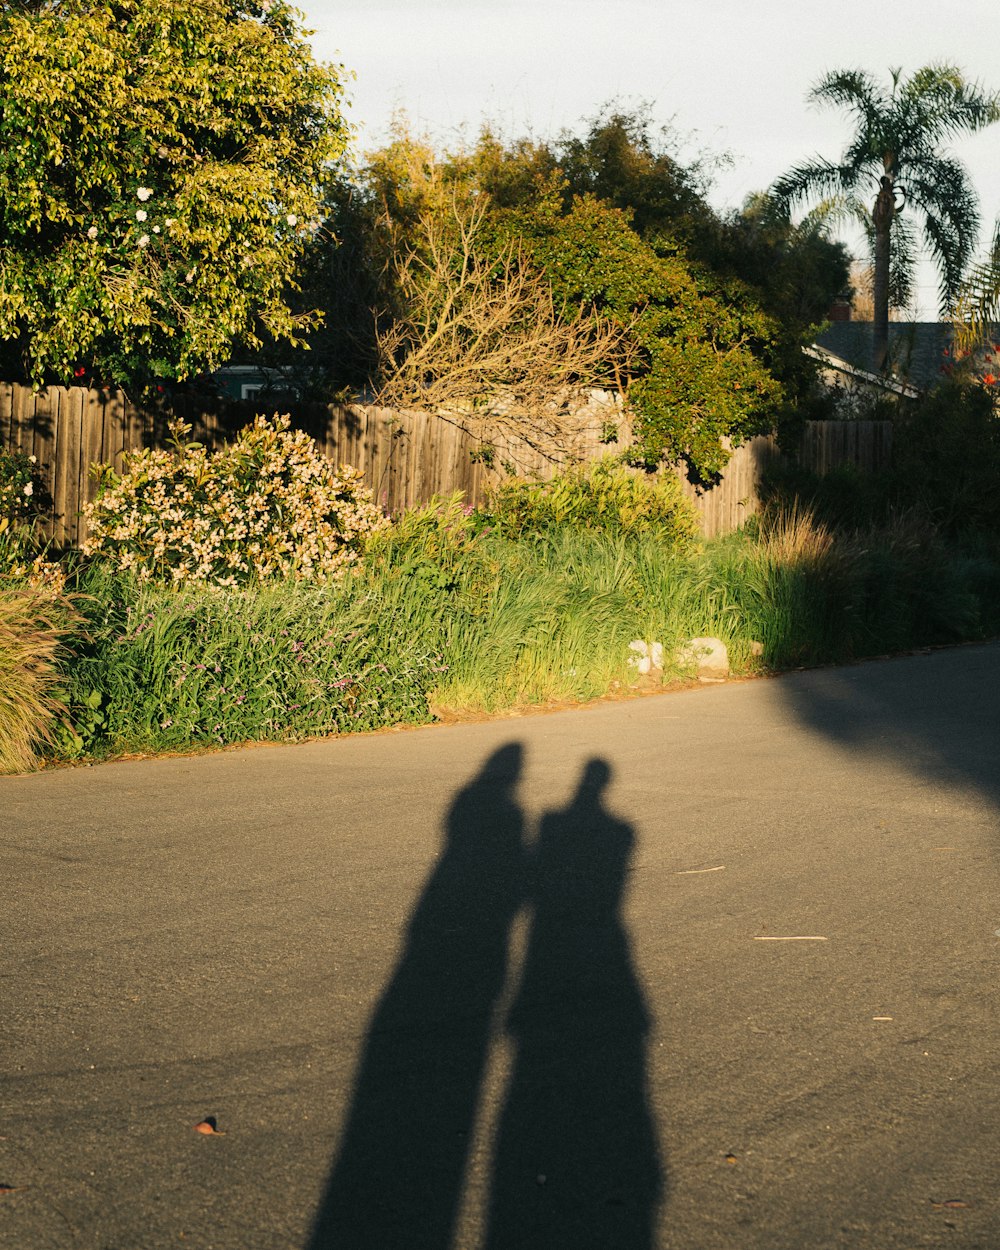 a shadow of two people riding a skateboard down a street